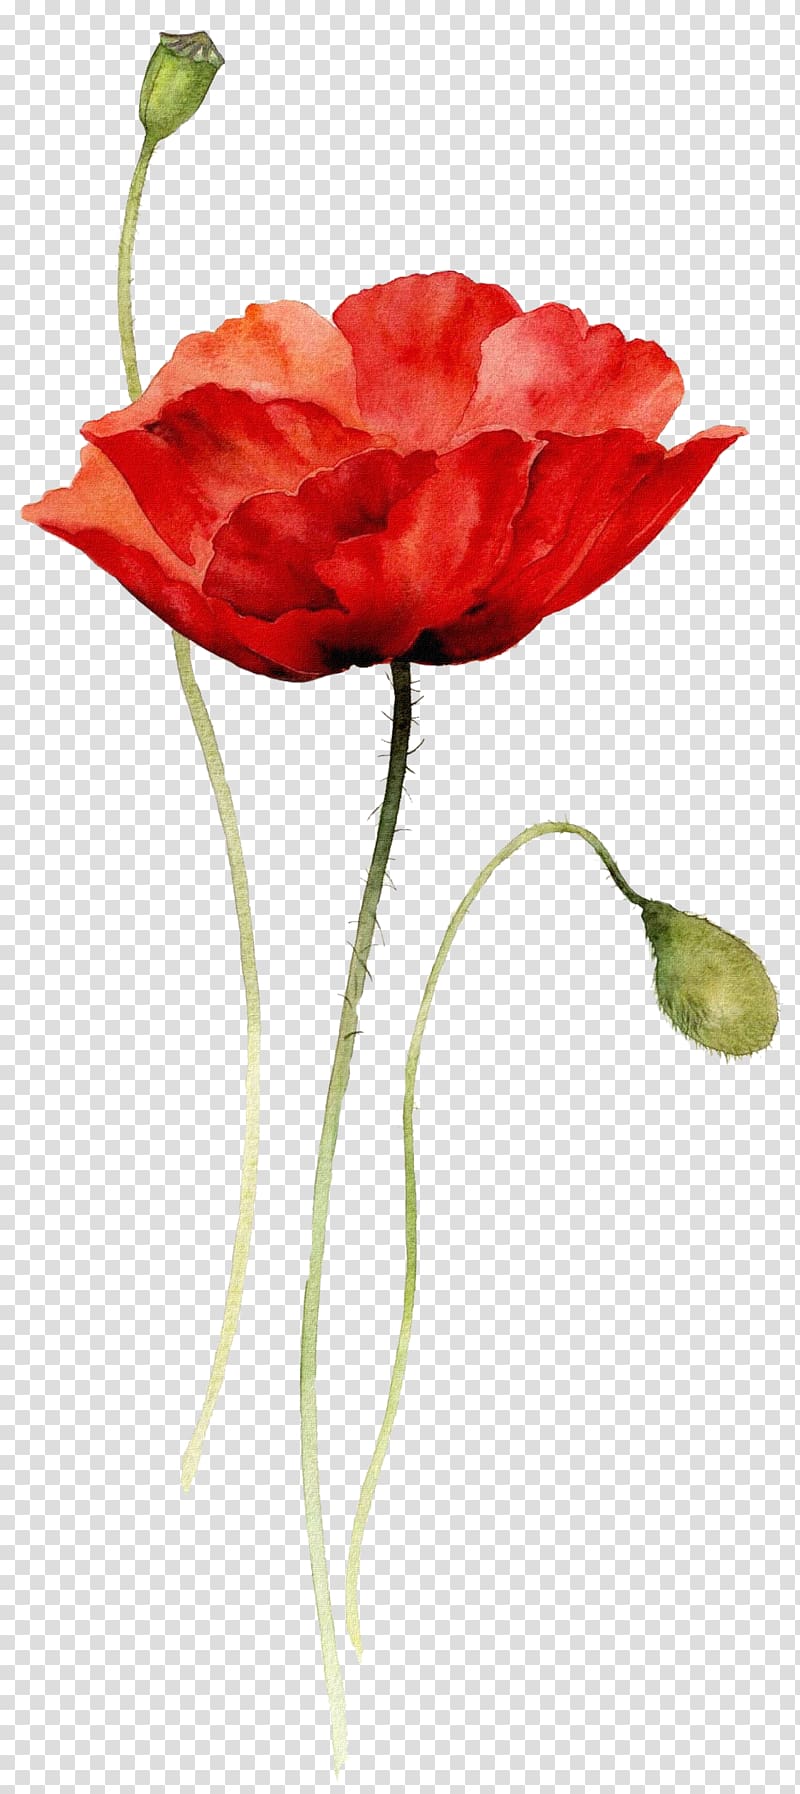 red flower , Watercolor painting Drawing Flower Poppy, watercolor flowers transparent background PNG clipart